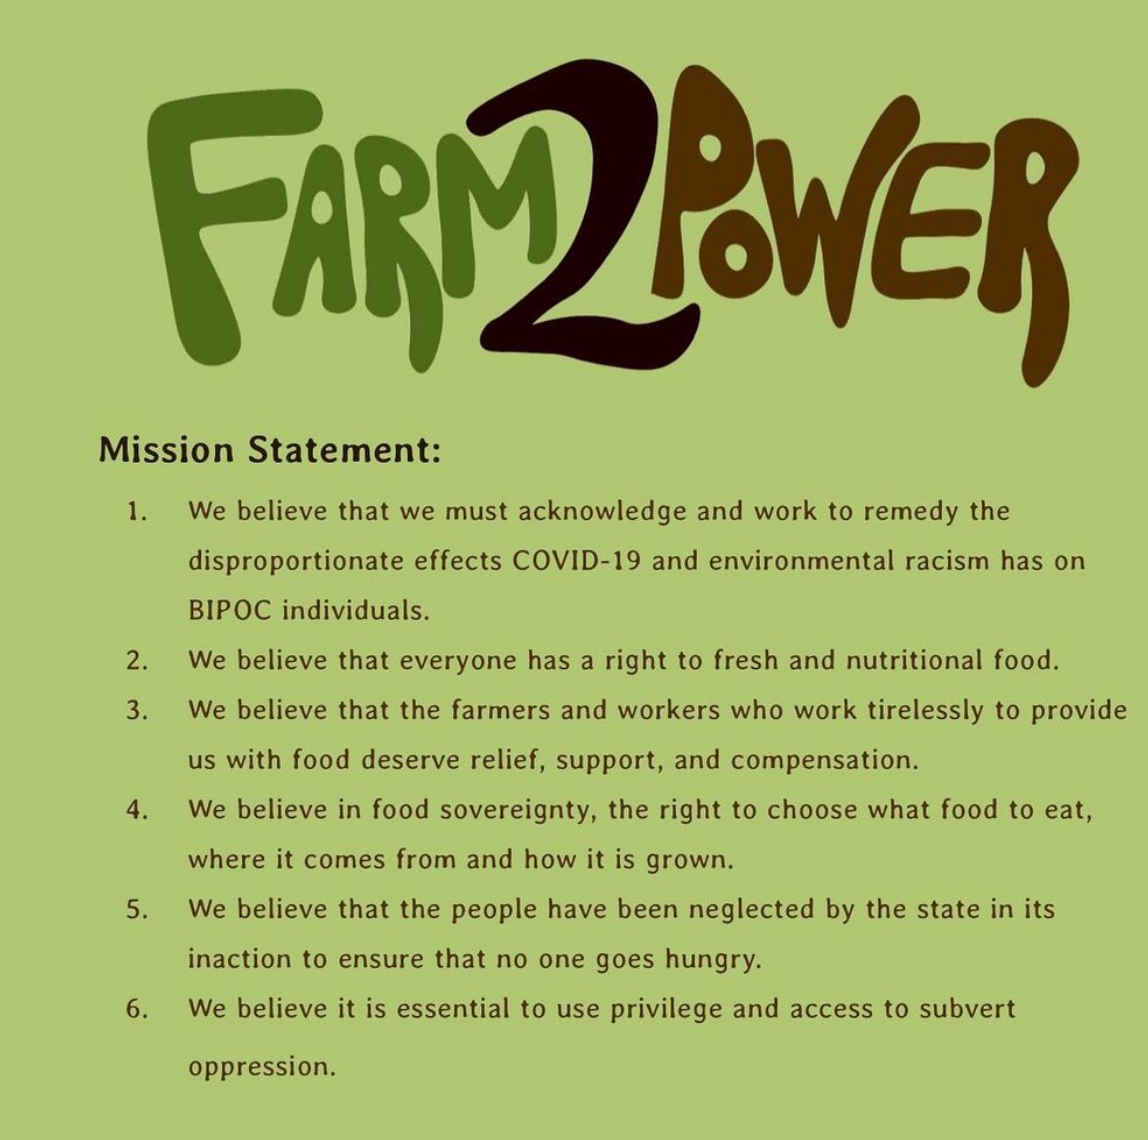 Farm2Power name and mission statement